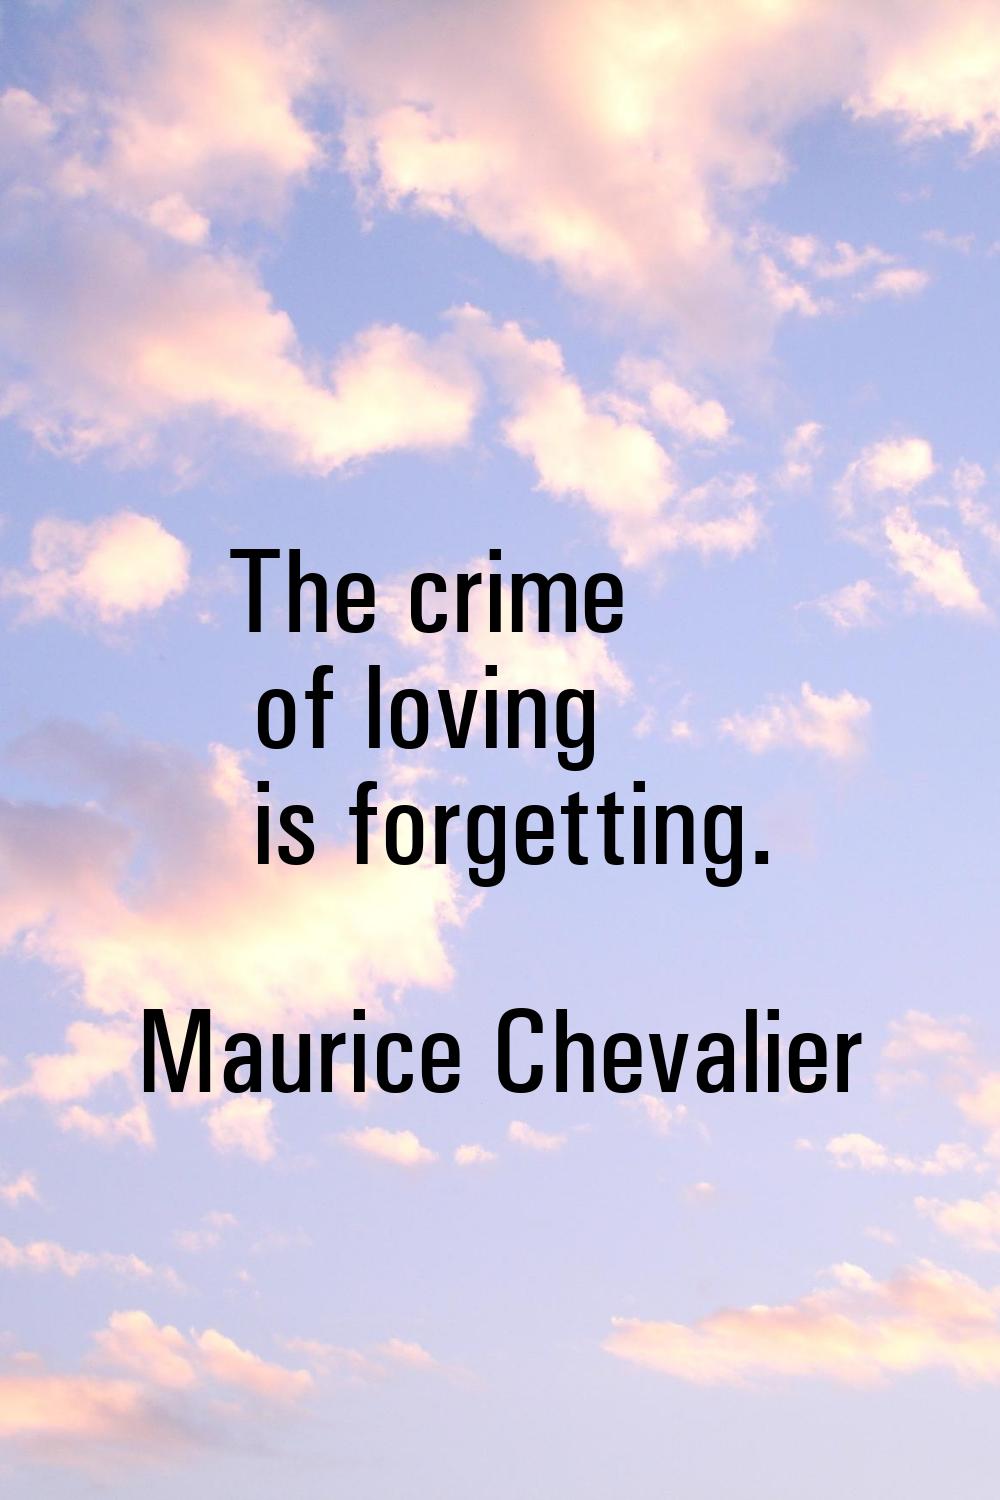 The crime of loving is forgetting.